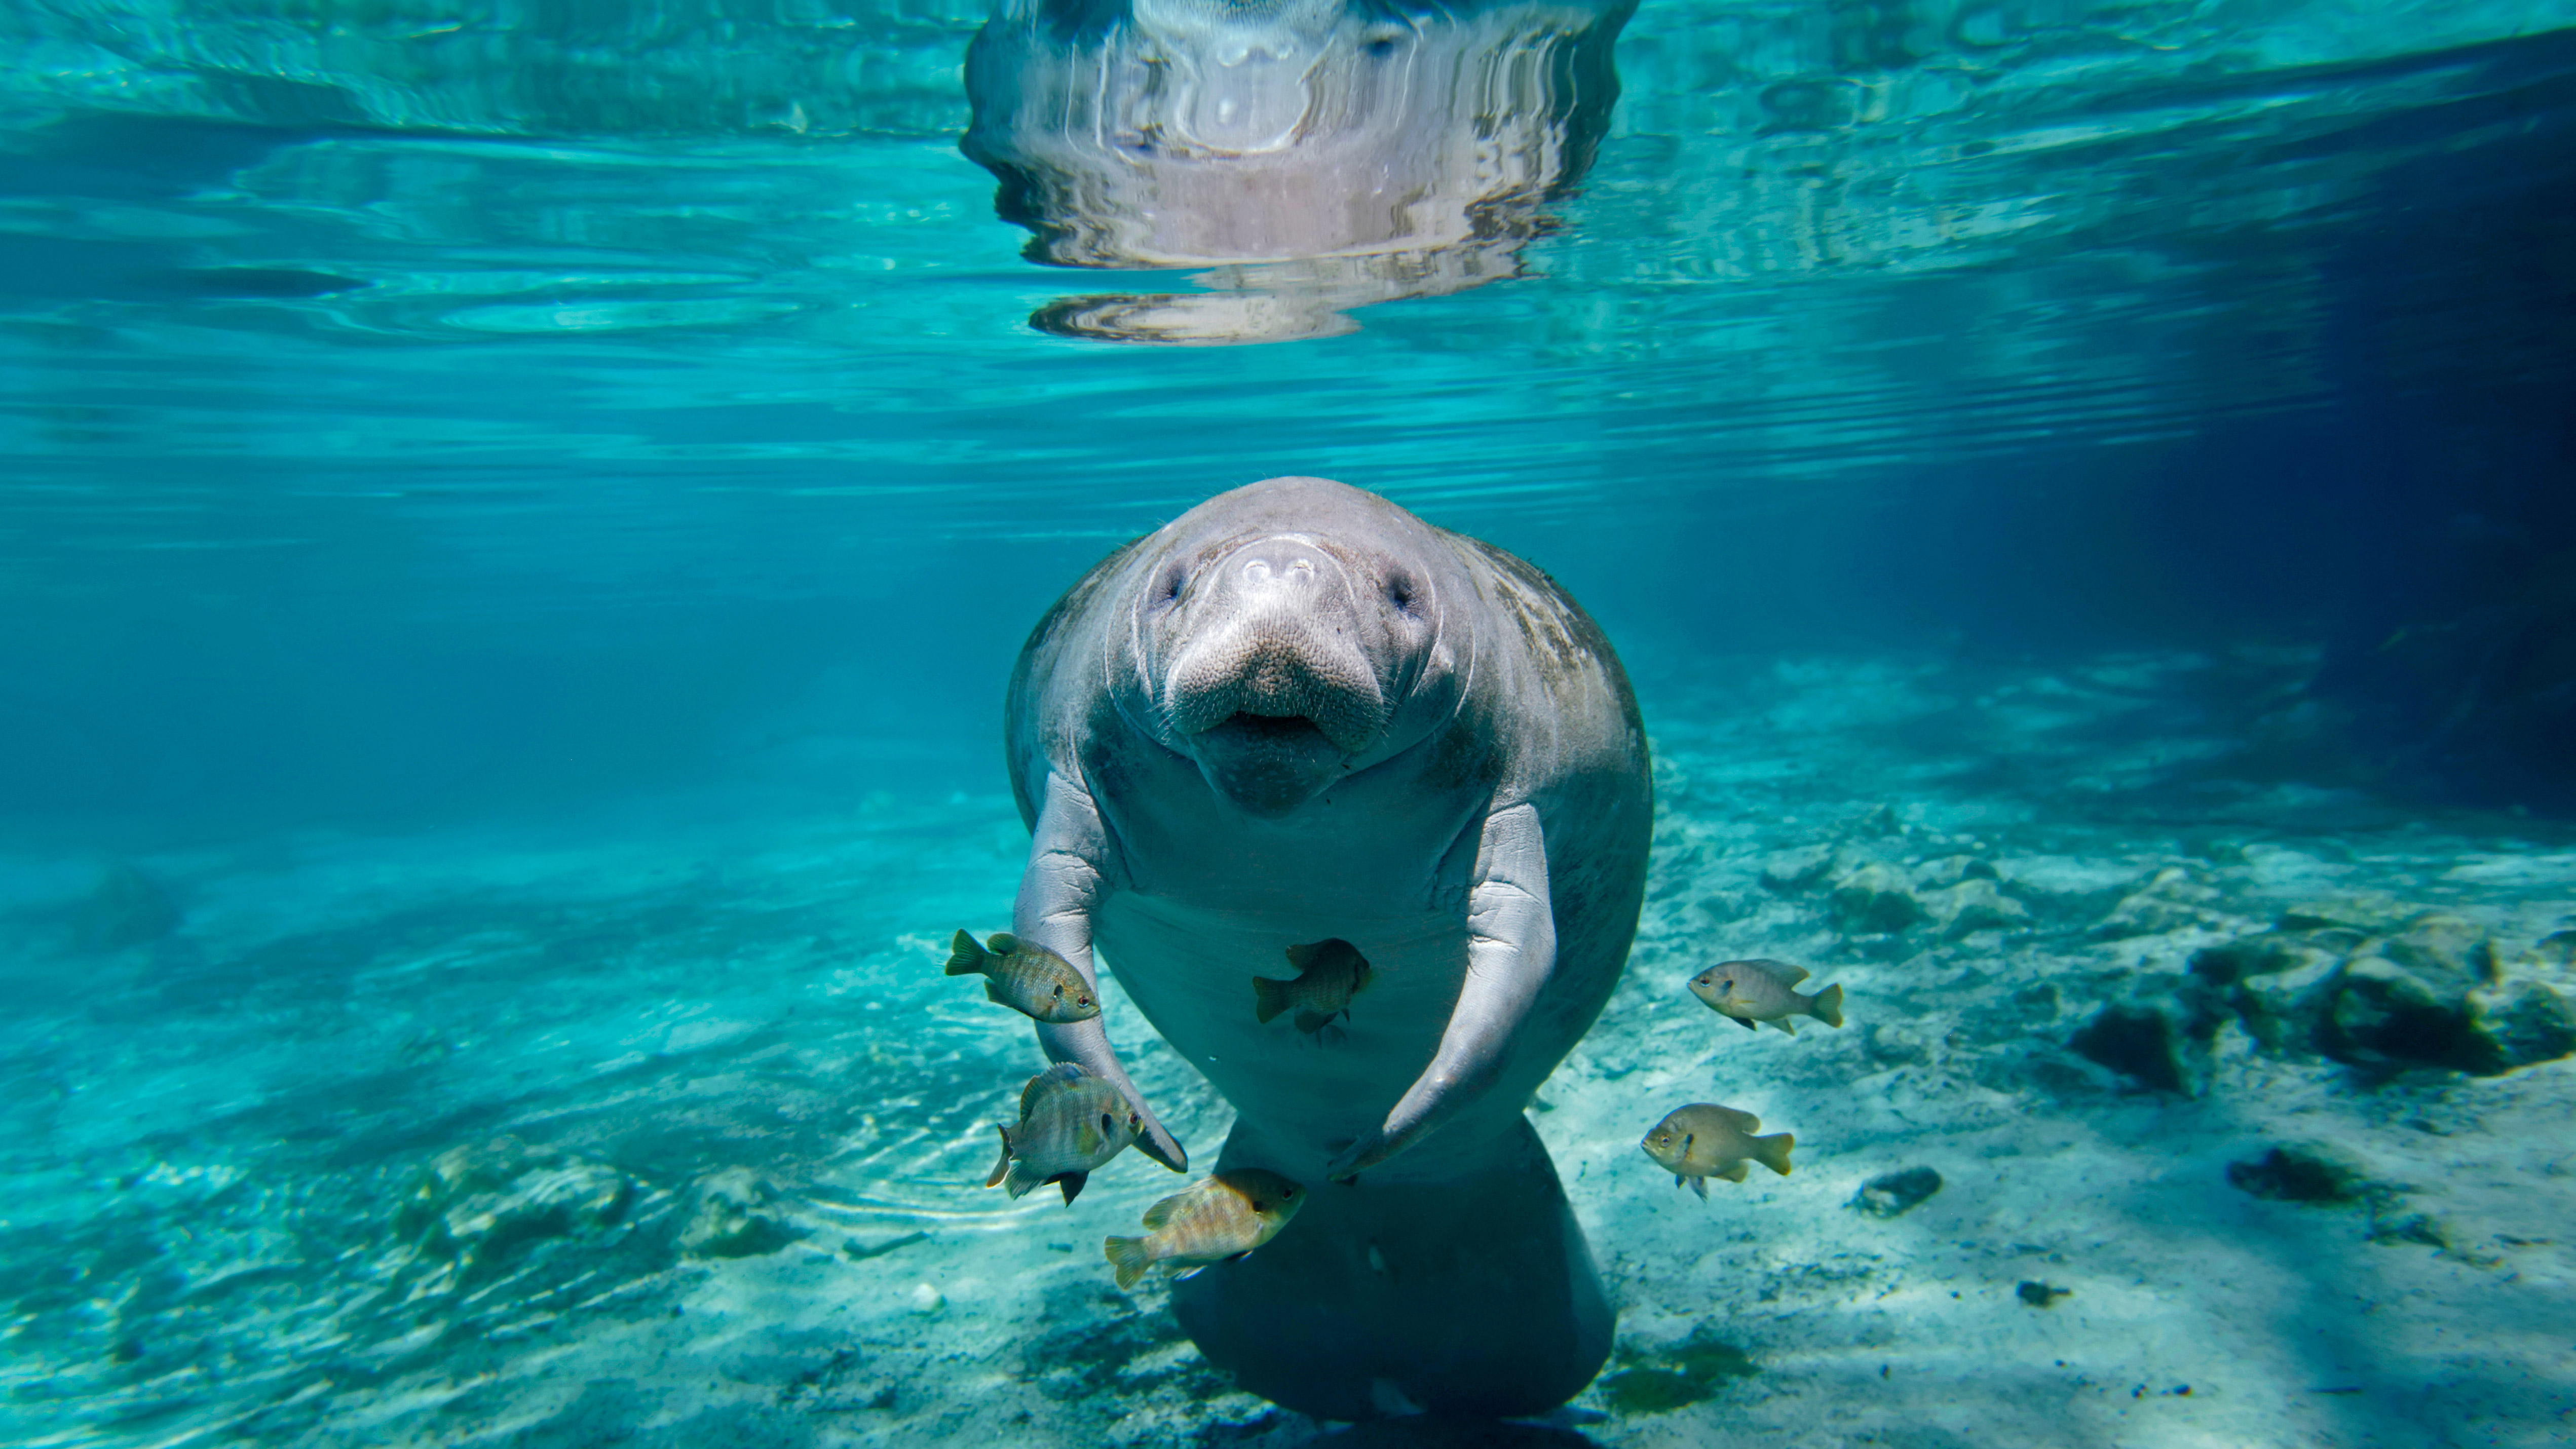 Manatee in Florida by Paul E Tessier